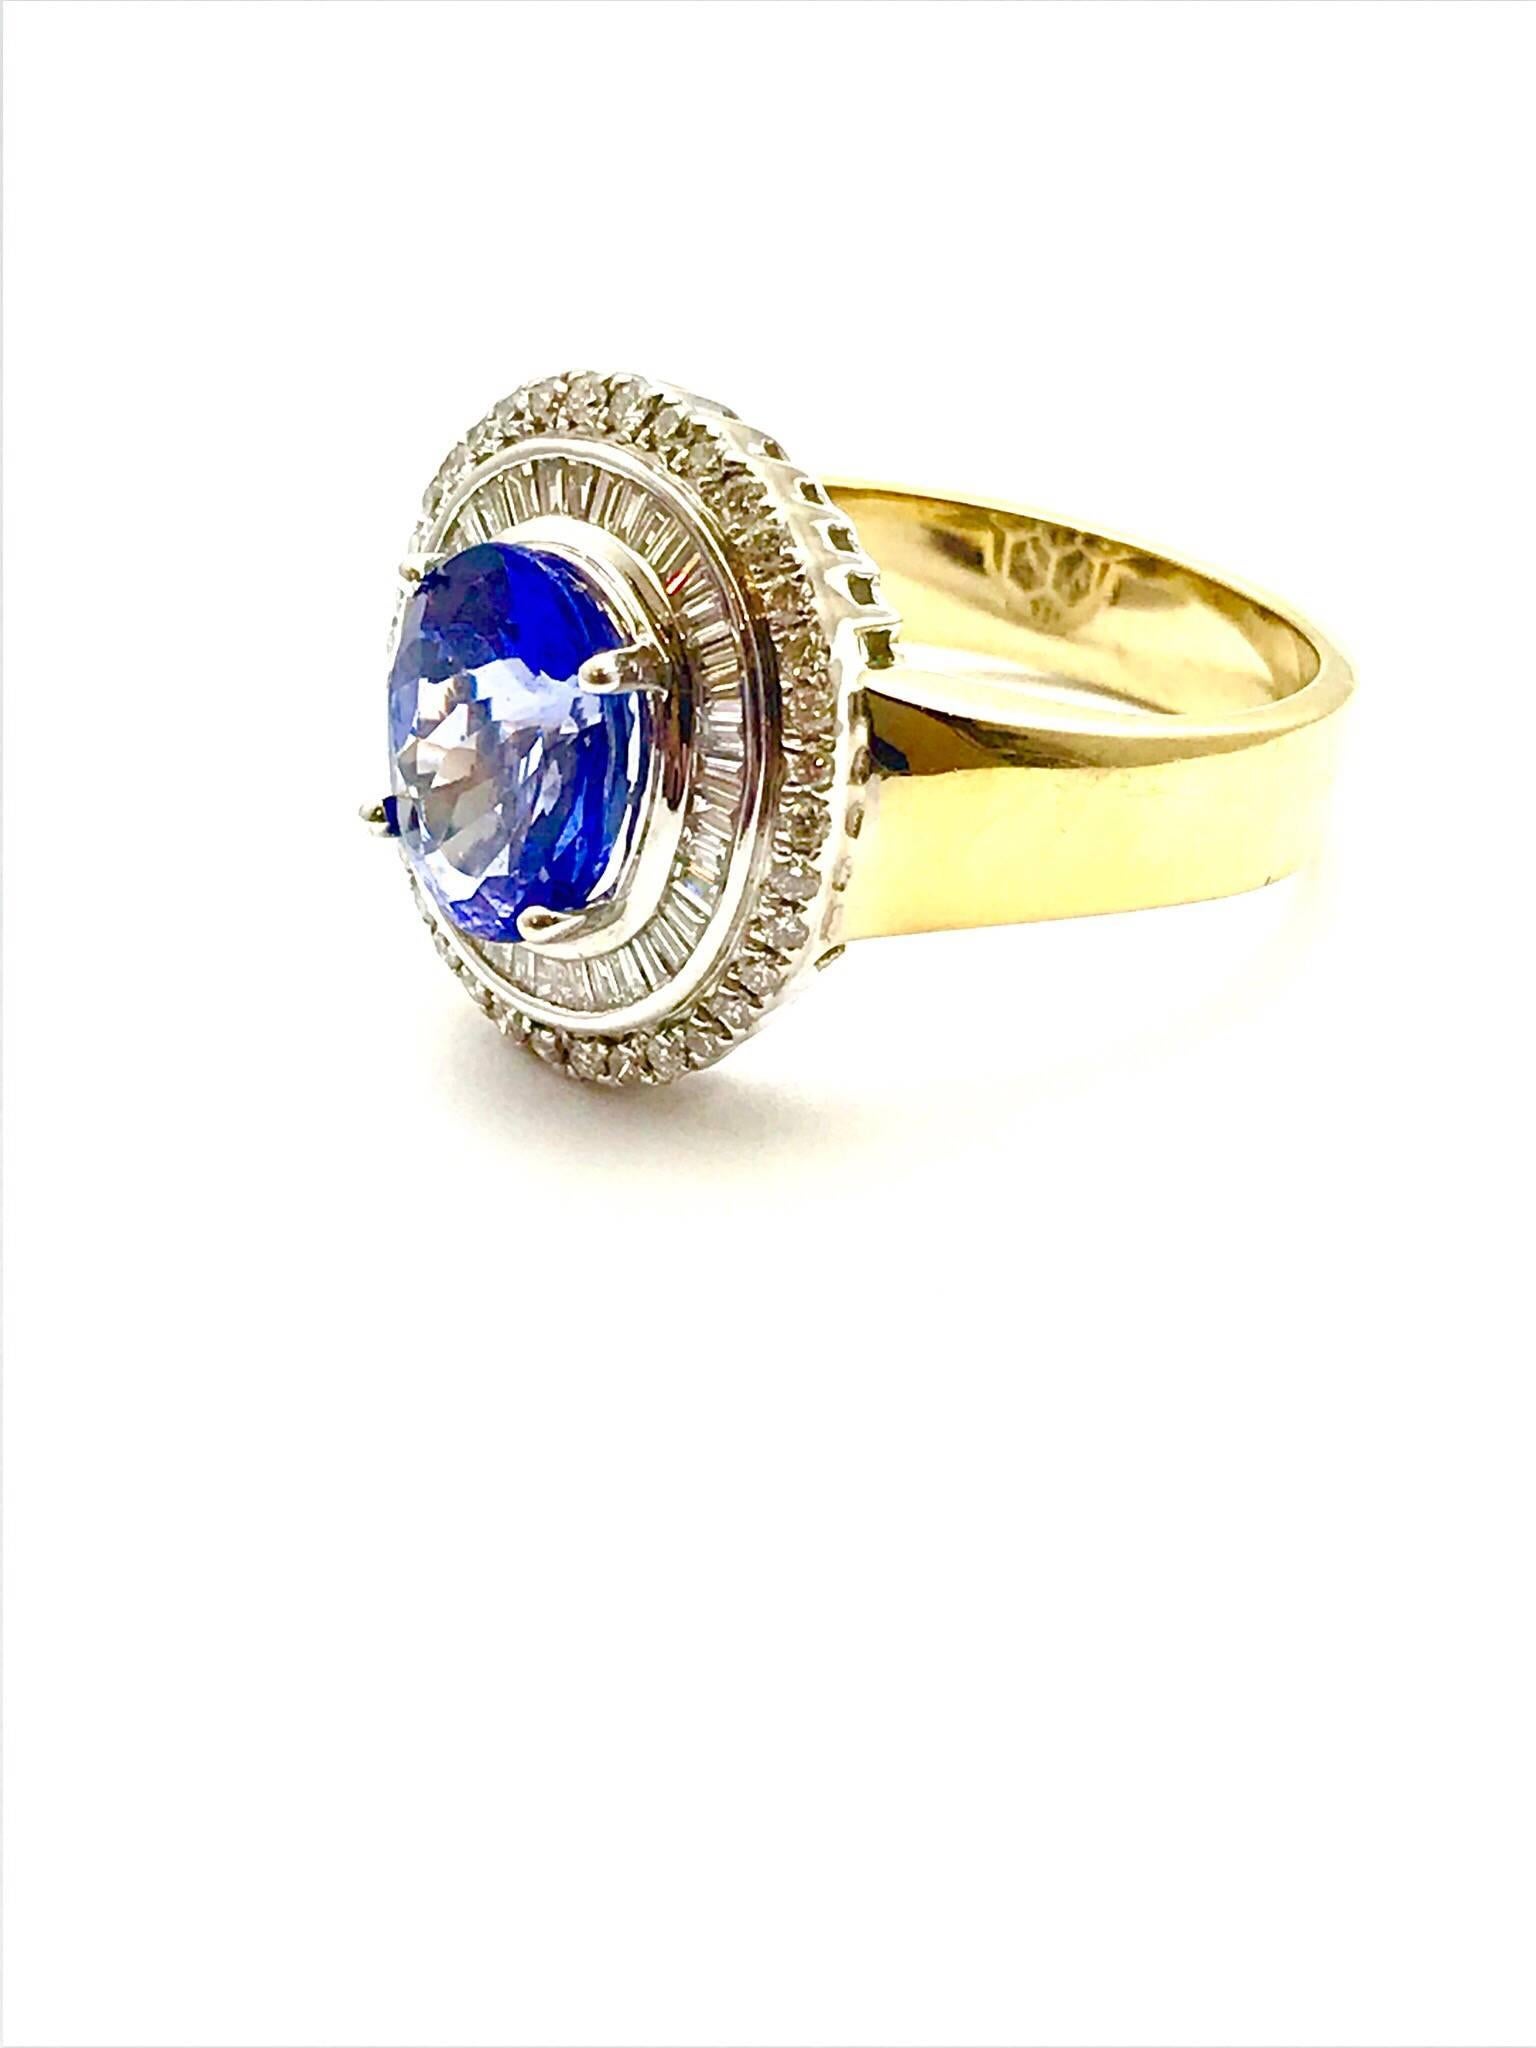 A 2.60 carat tanzanite and diamond 18 karat white and yellow gold fashion ring.  The oval tanzanite is set with four prongs, surrounded by a single row of baguette diamonds, which is framed in by a single row of round brilliant diamonds, all set in